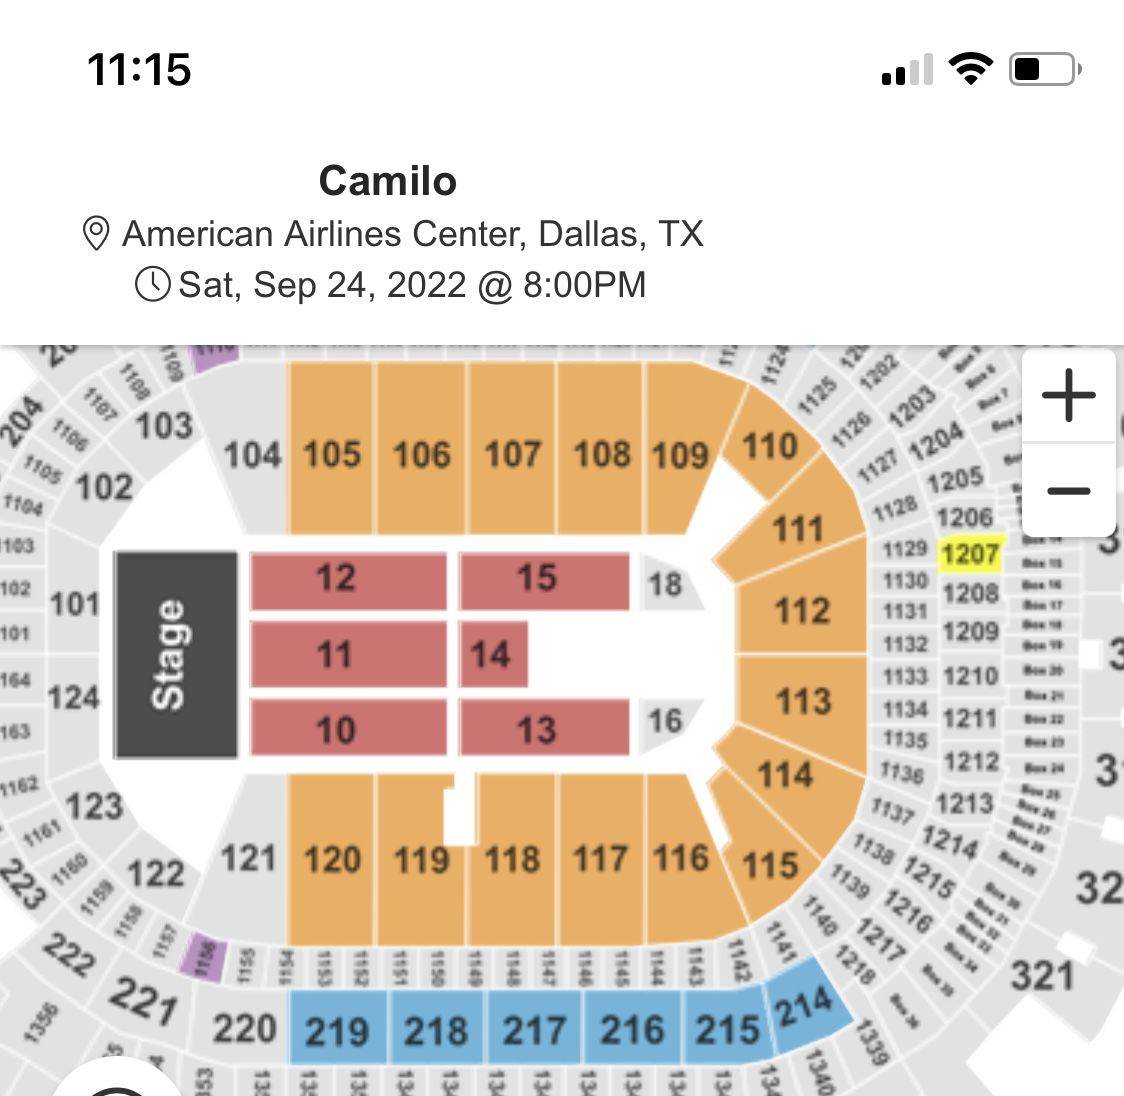 CAMILO TICKETS AMERICAN AIRLINES 